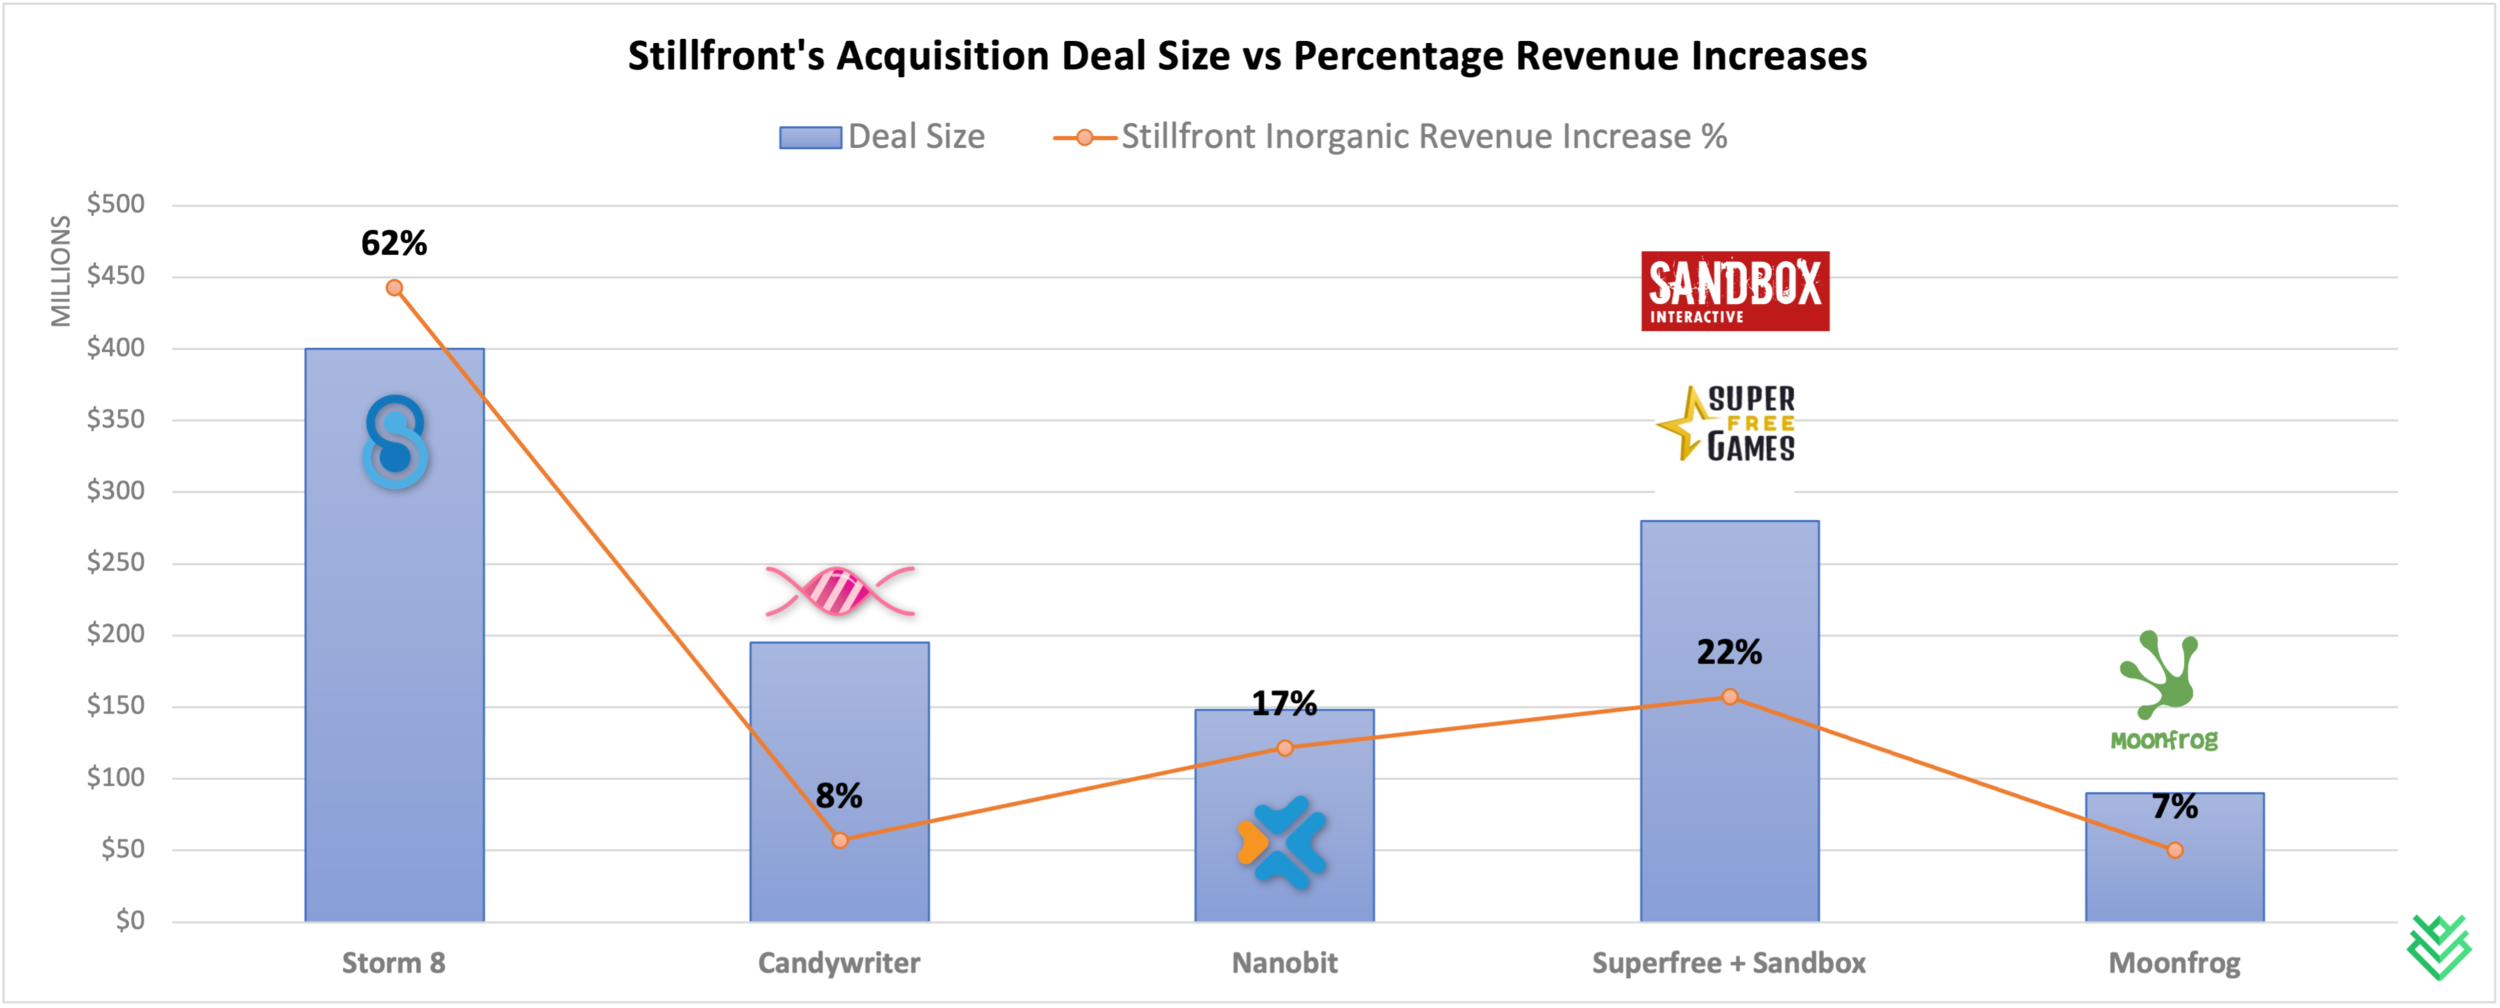 This chart shows the size of various deals (blue bar) as well as the revenue increases each acquisition immediately contributed (orange markers).